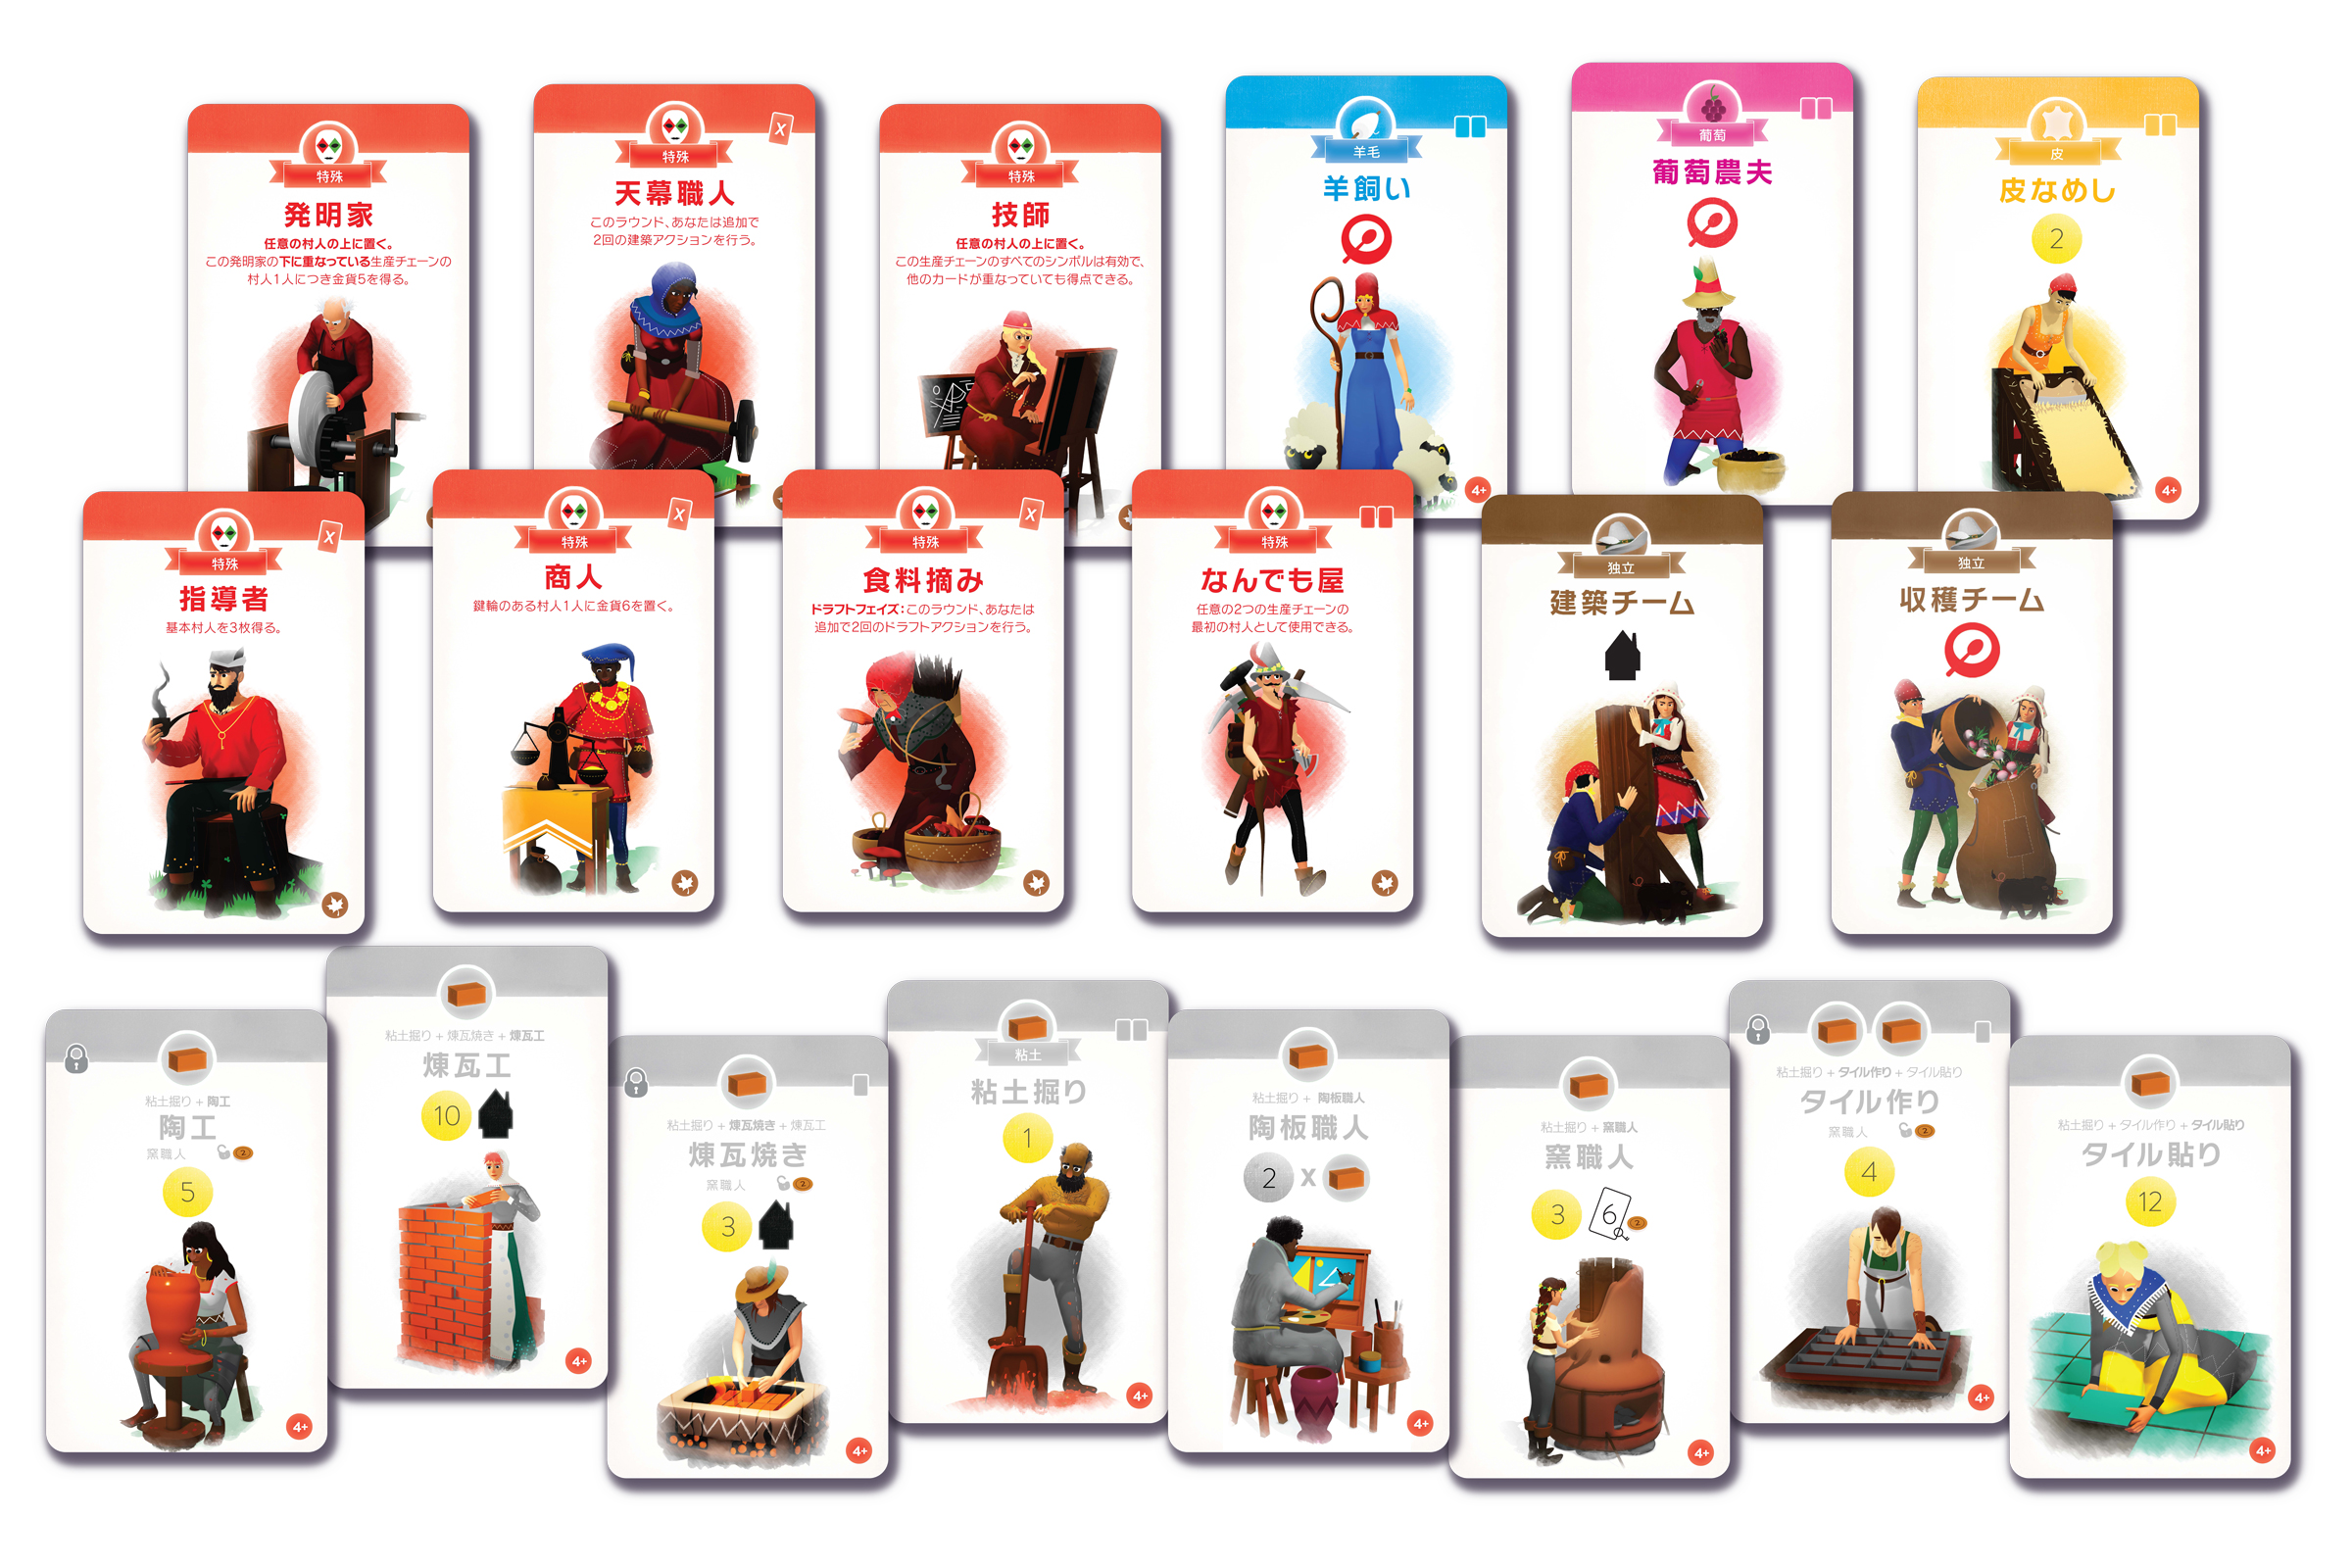 https://hobbyjapan.games/wp-content/uploads/2022/06/villagers_SS_cards_person.jpg